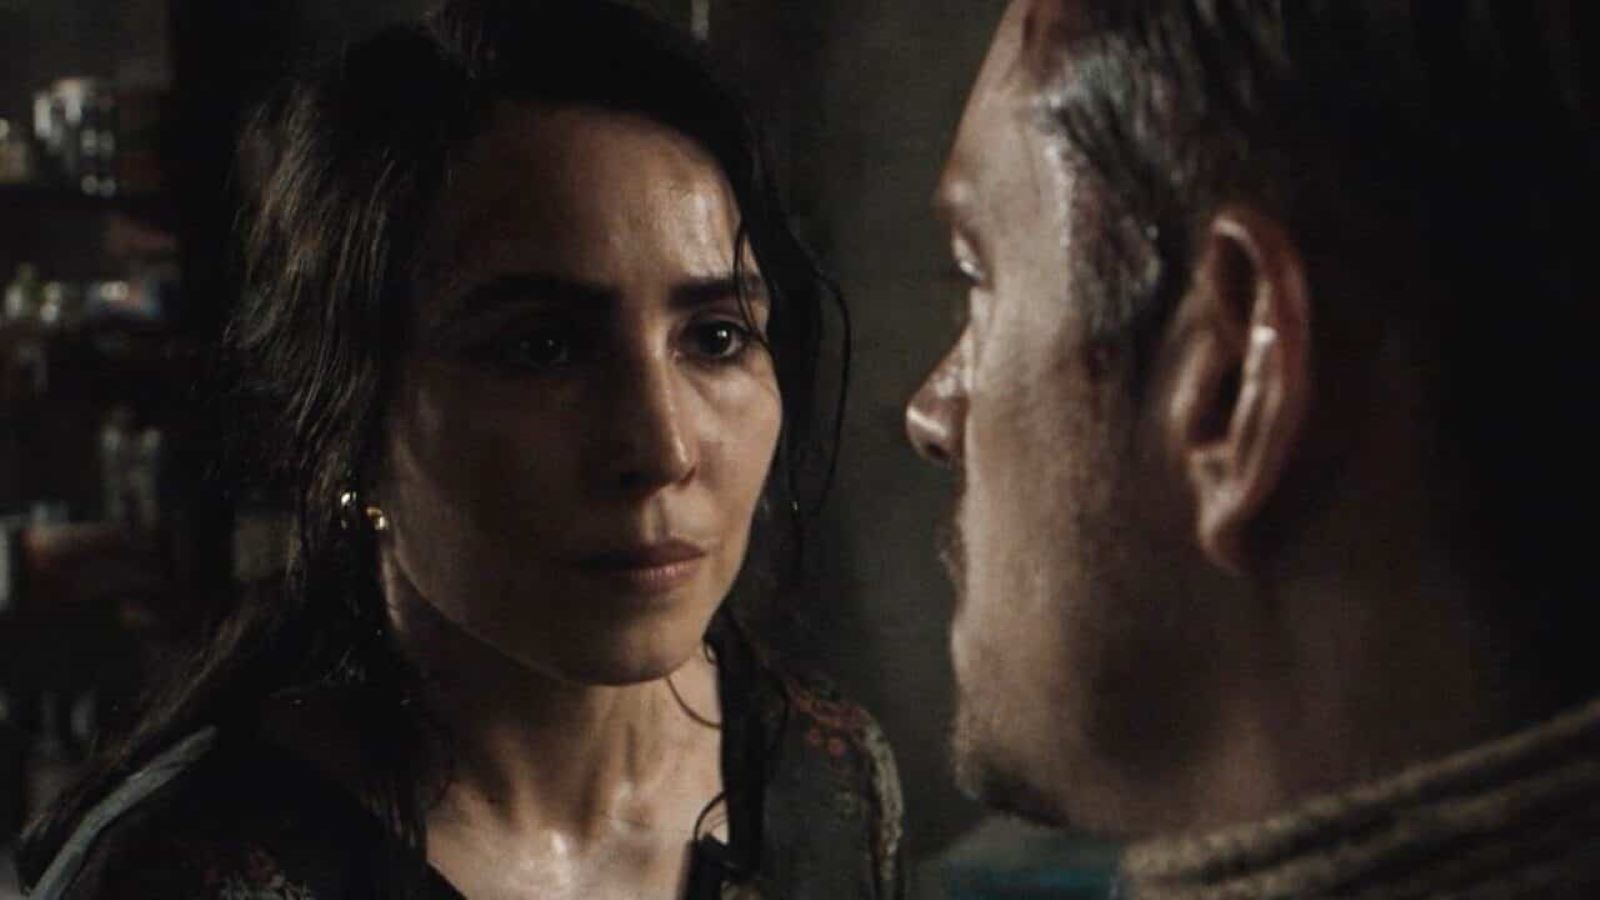 The Secret - The hidden truths tonight on Rai 4: plot and cast of the film with Noomi Rapace